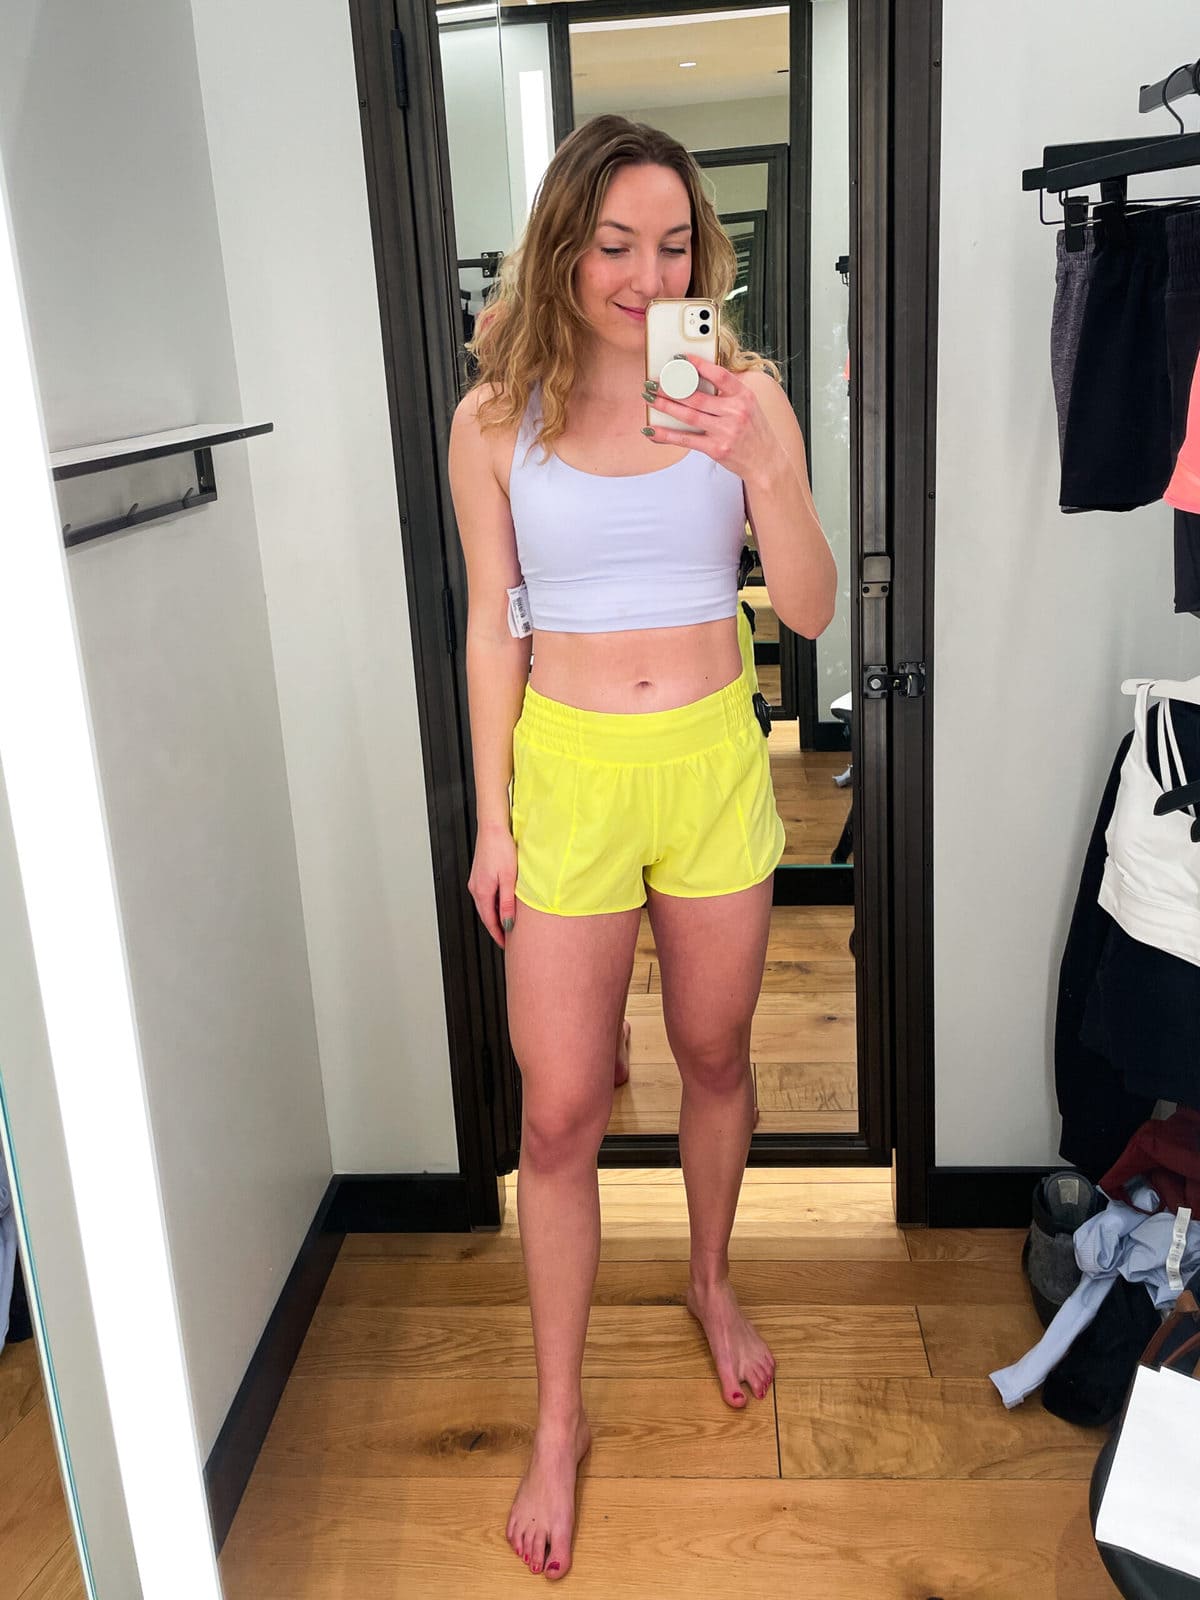 Rachel wearing Hotty Hot High Rise Short 2.5" in a dressing room mirror picture